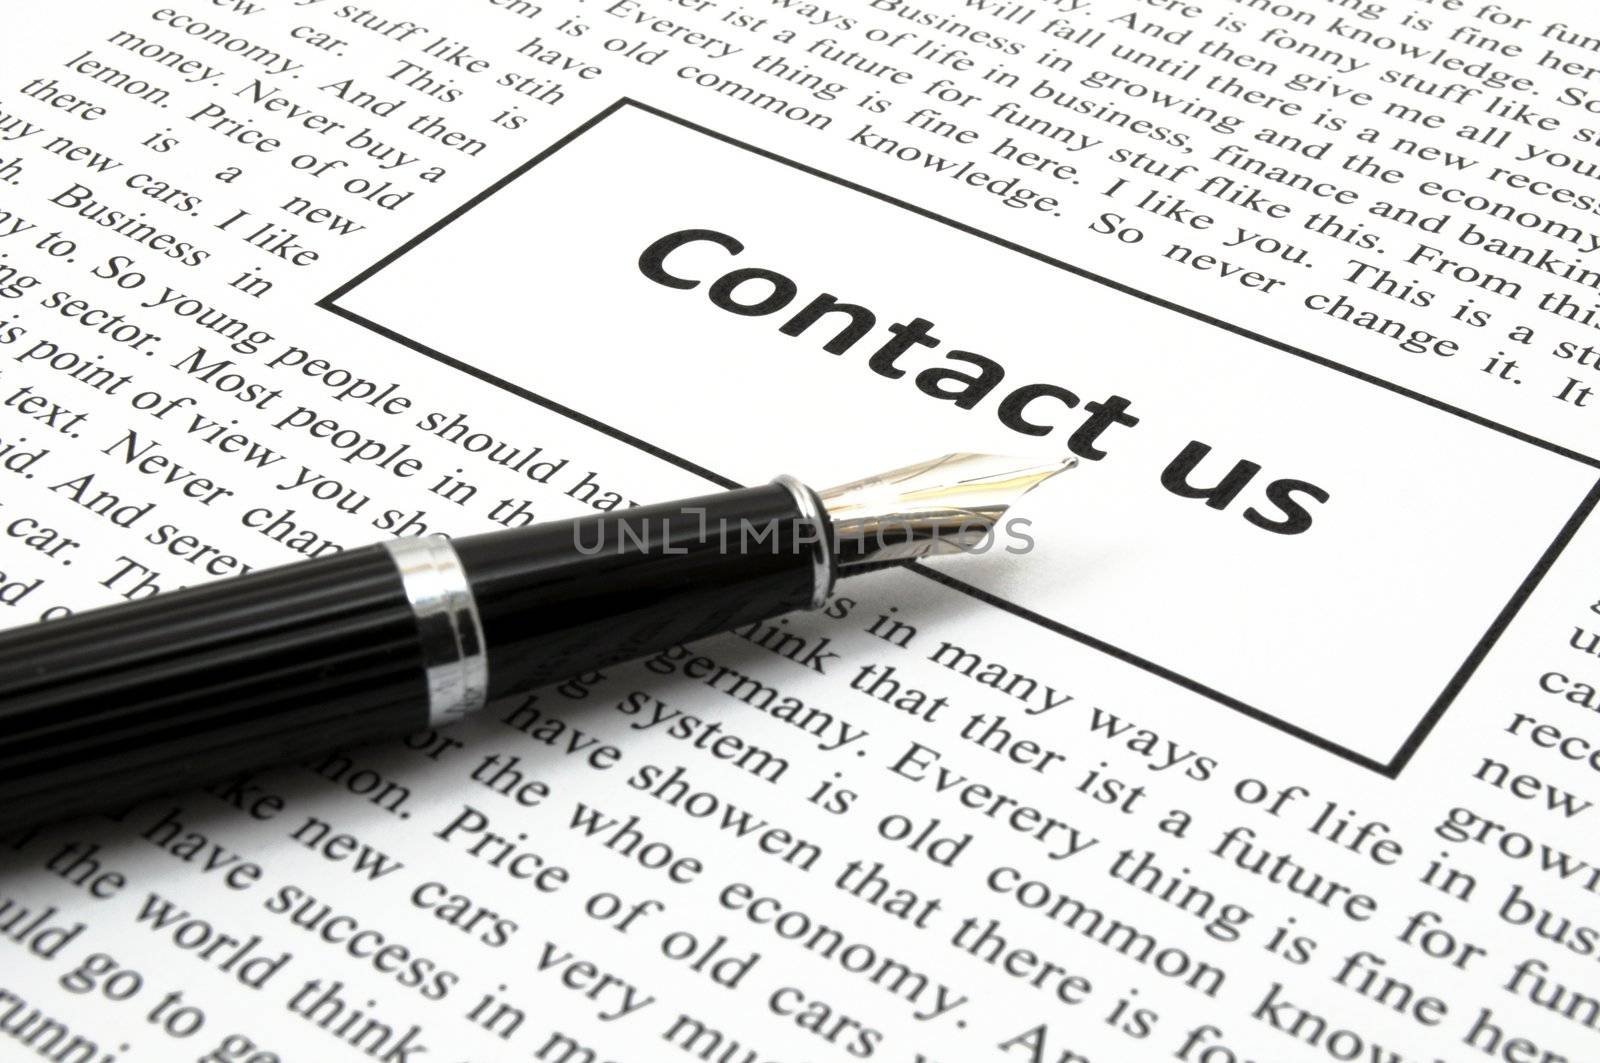 contact us concept with newspaper showing business communication